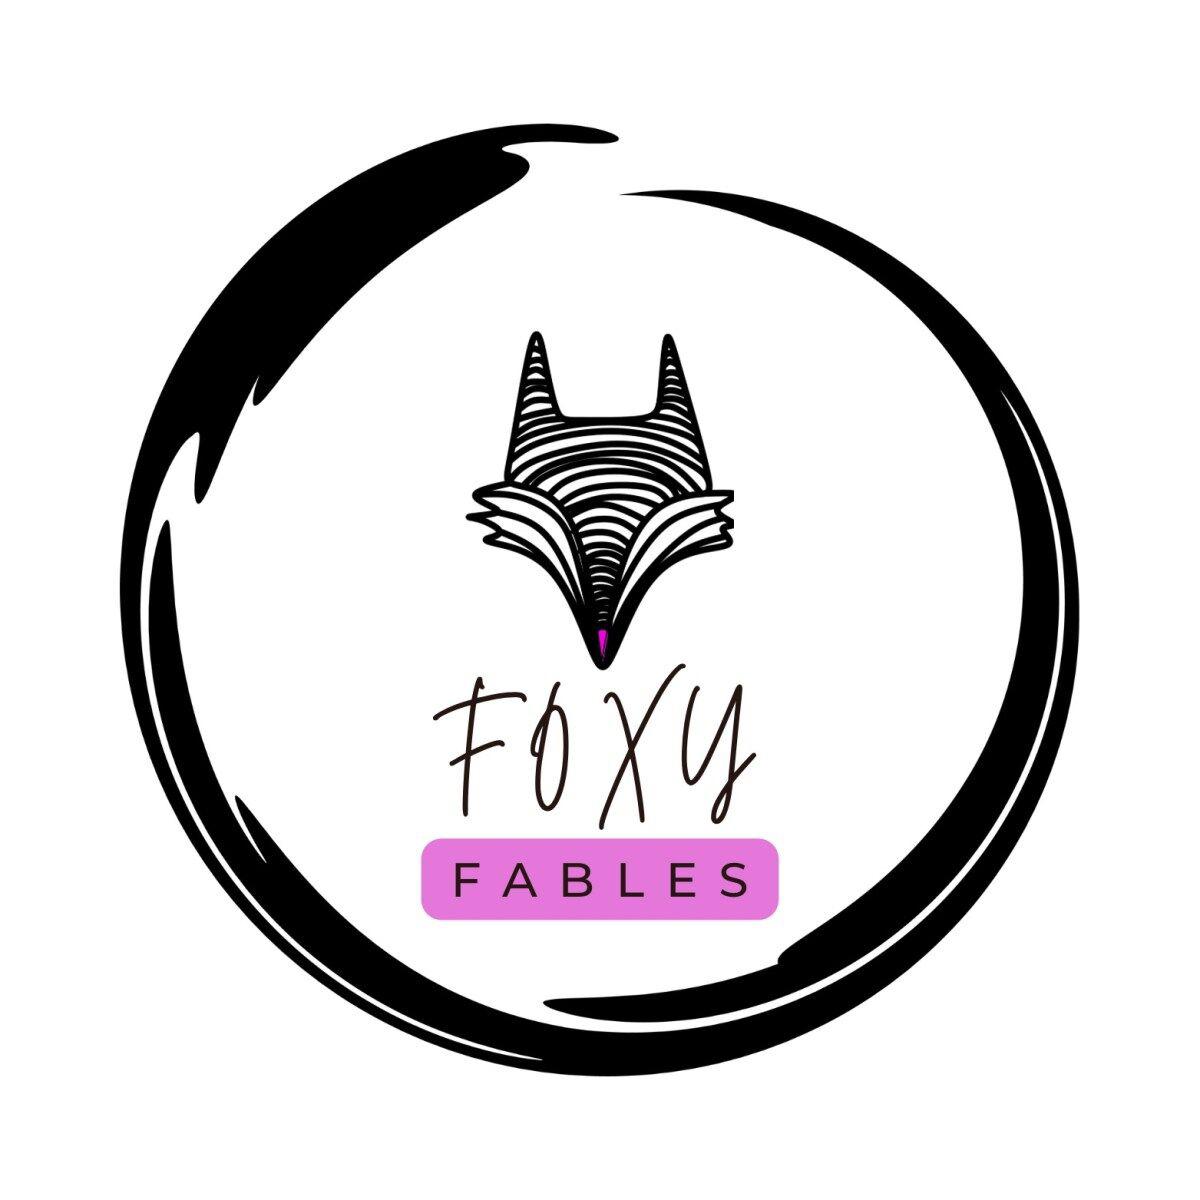 Foxy Fables's images